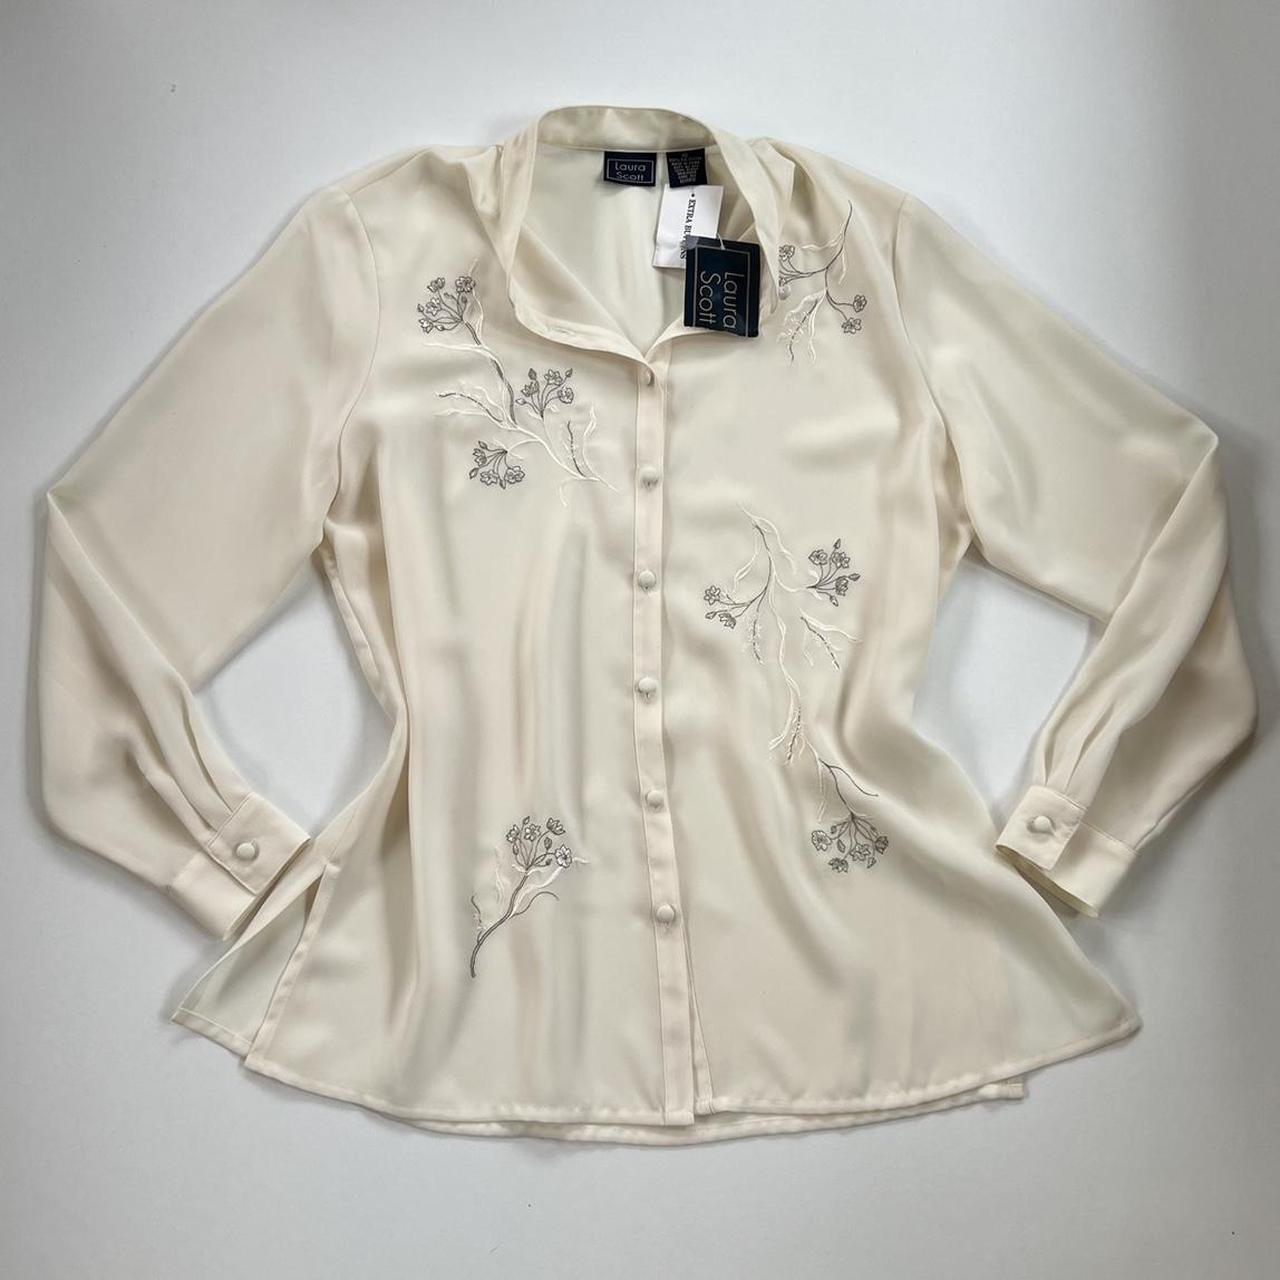 Sears Women's Cream and White Blouse